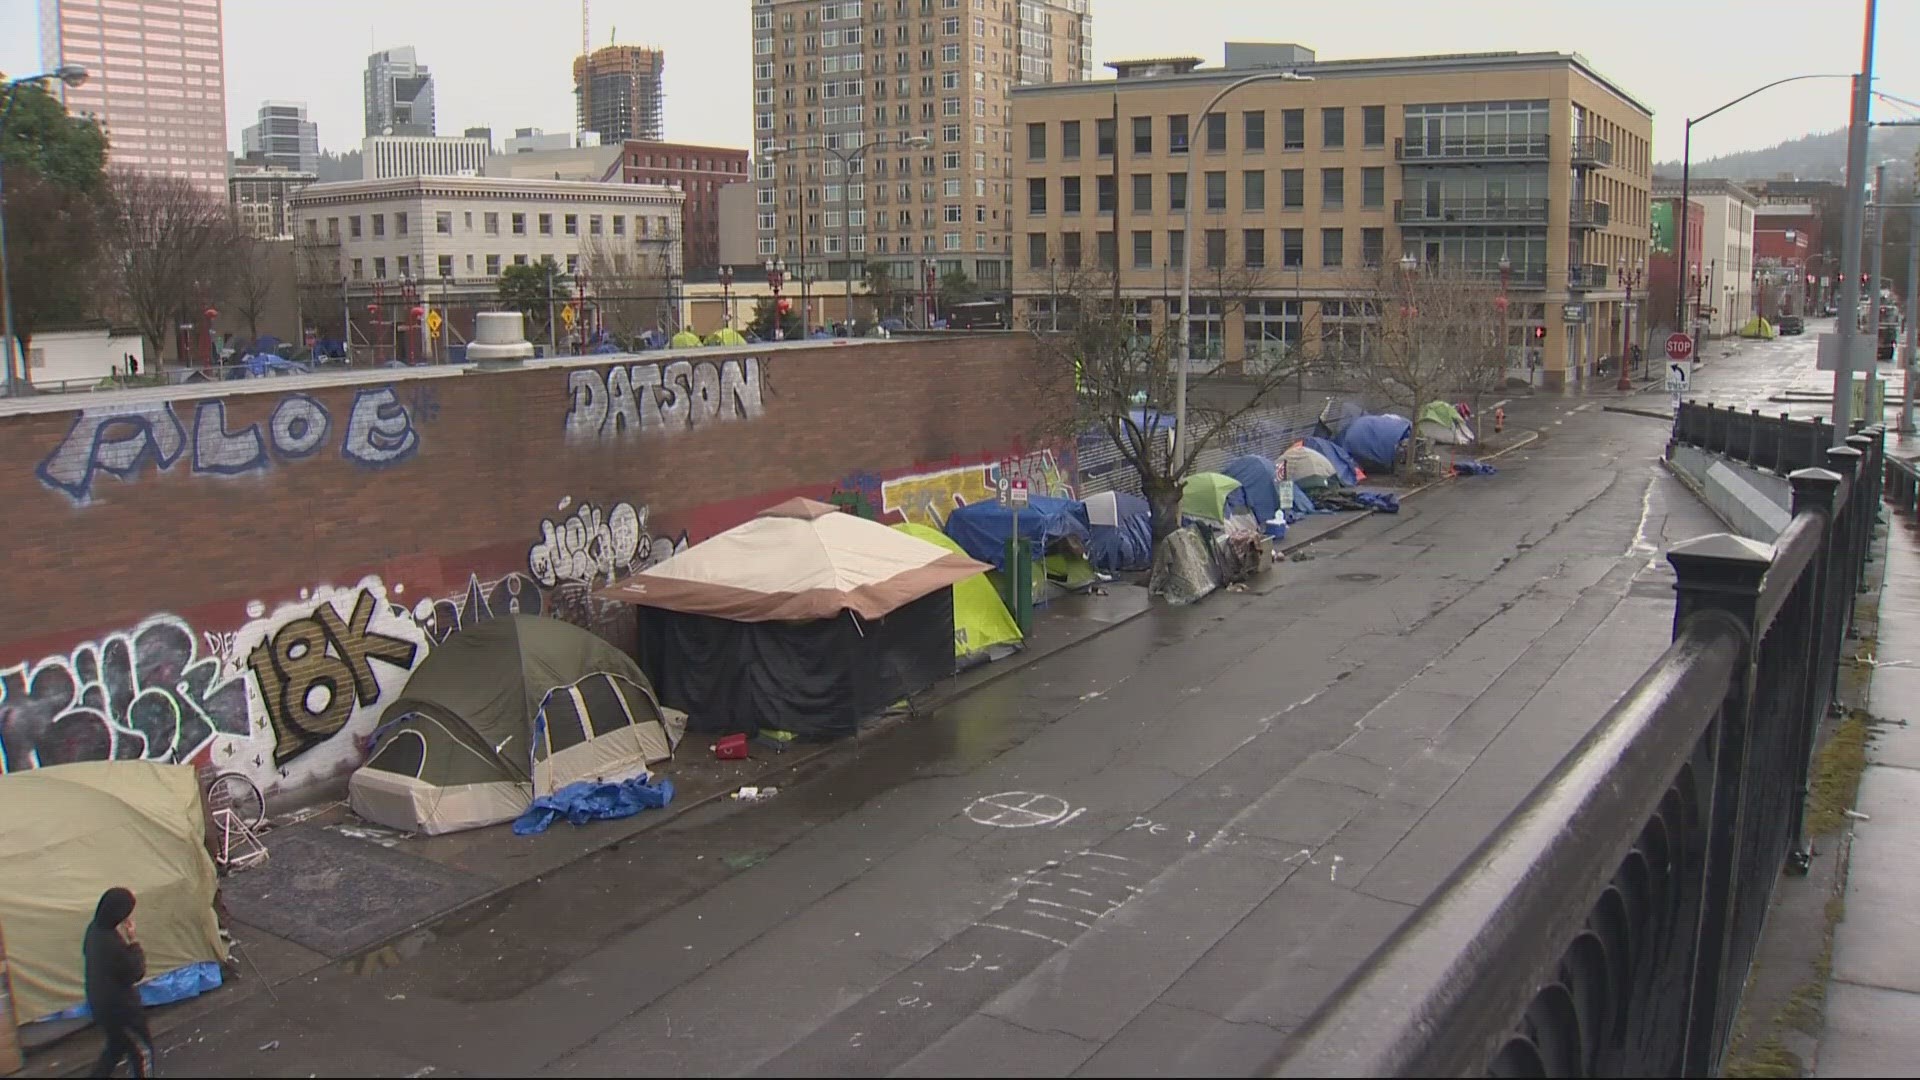 A contagious illness that causes vomiting and fevers is spreading through Portland’s Metro area leaving homeless people most at risk.